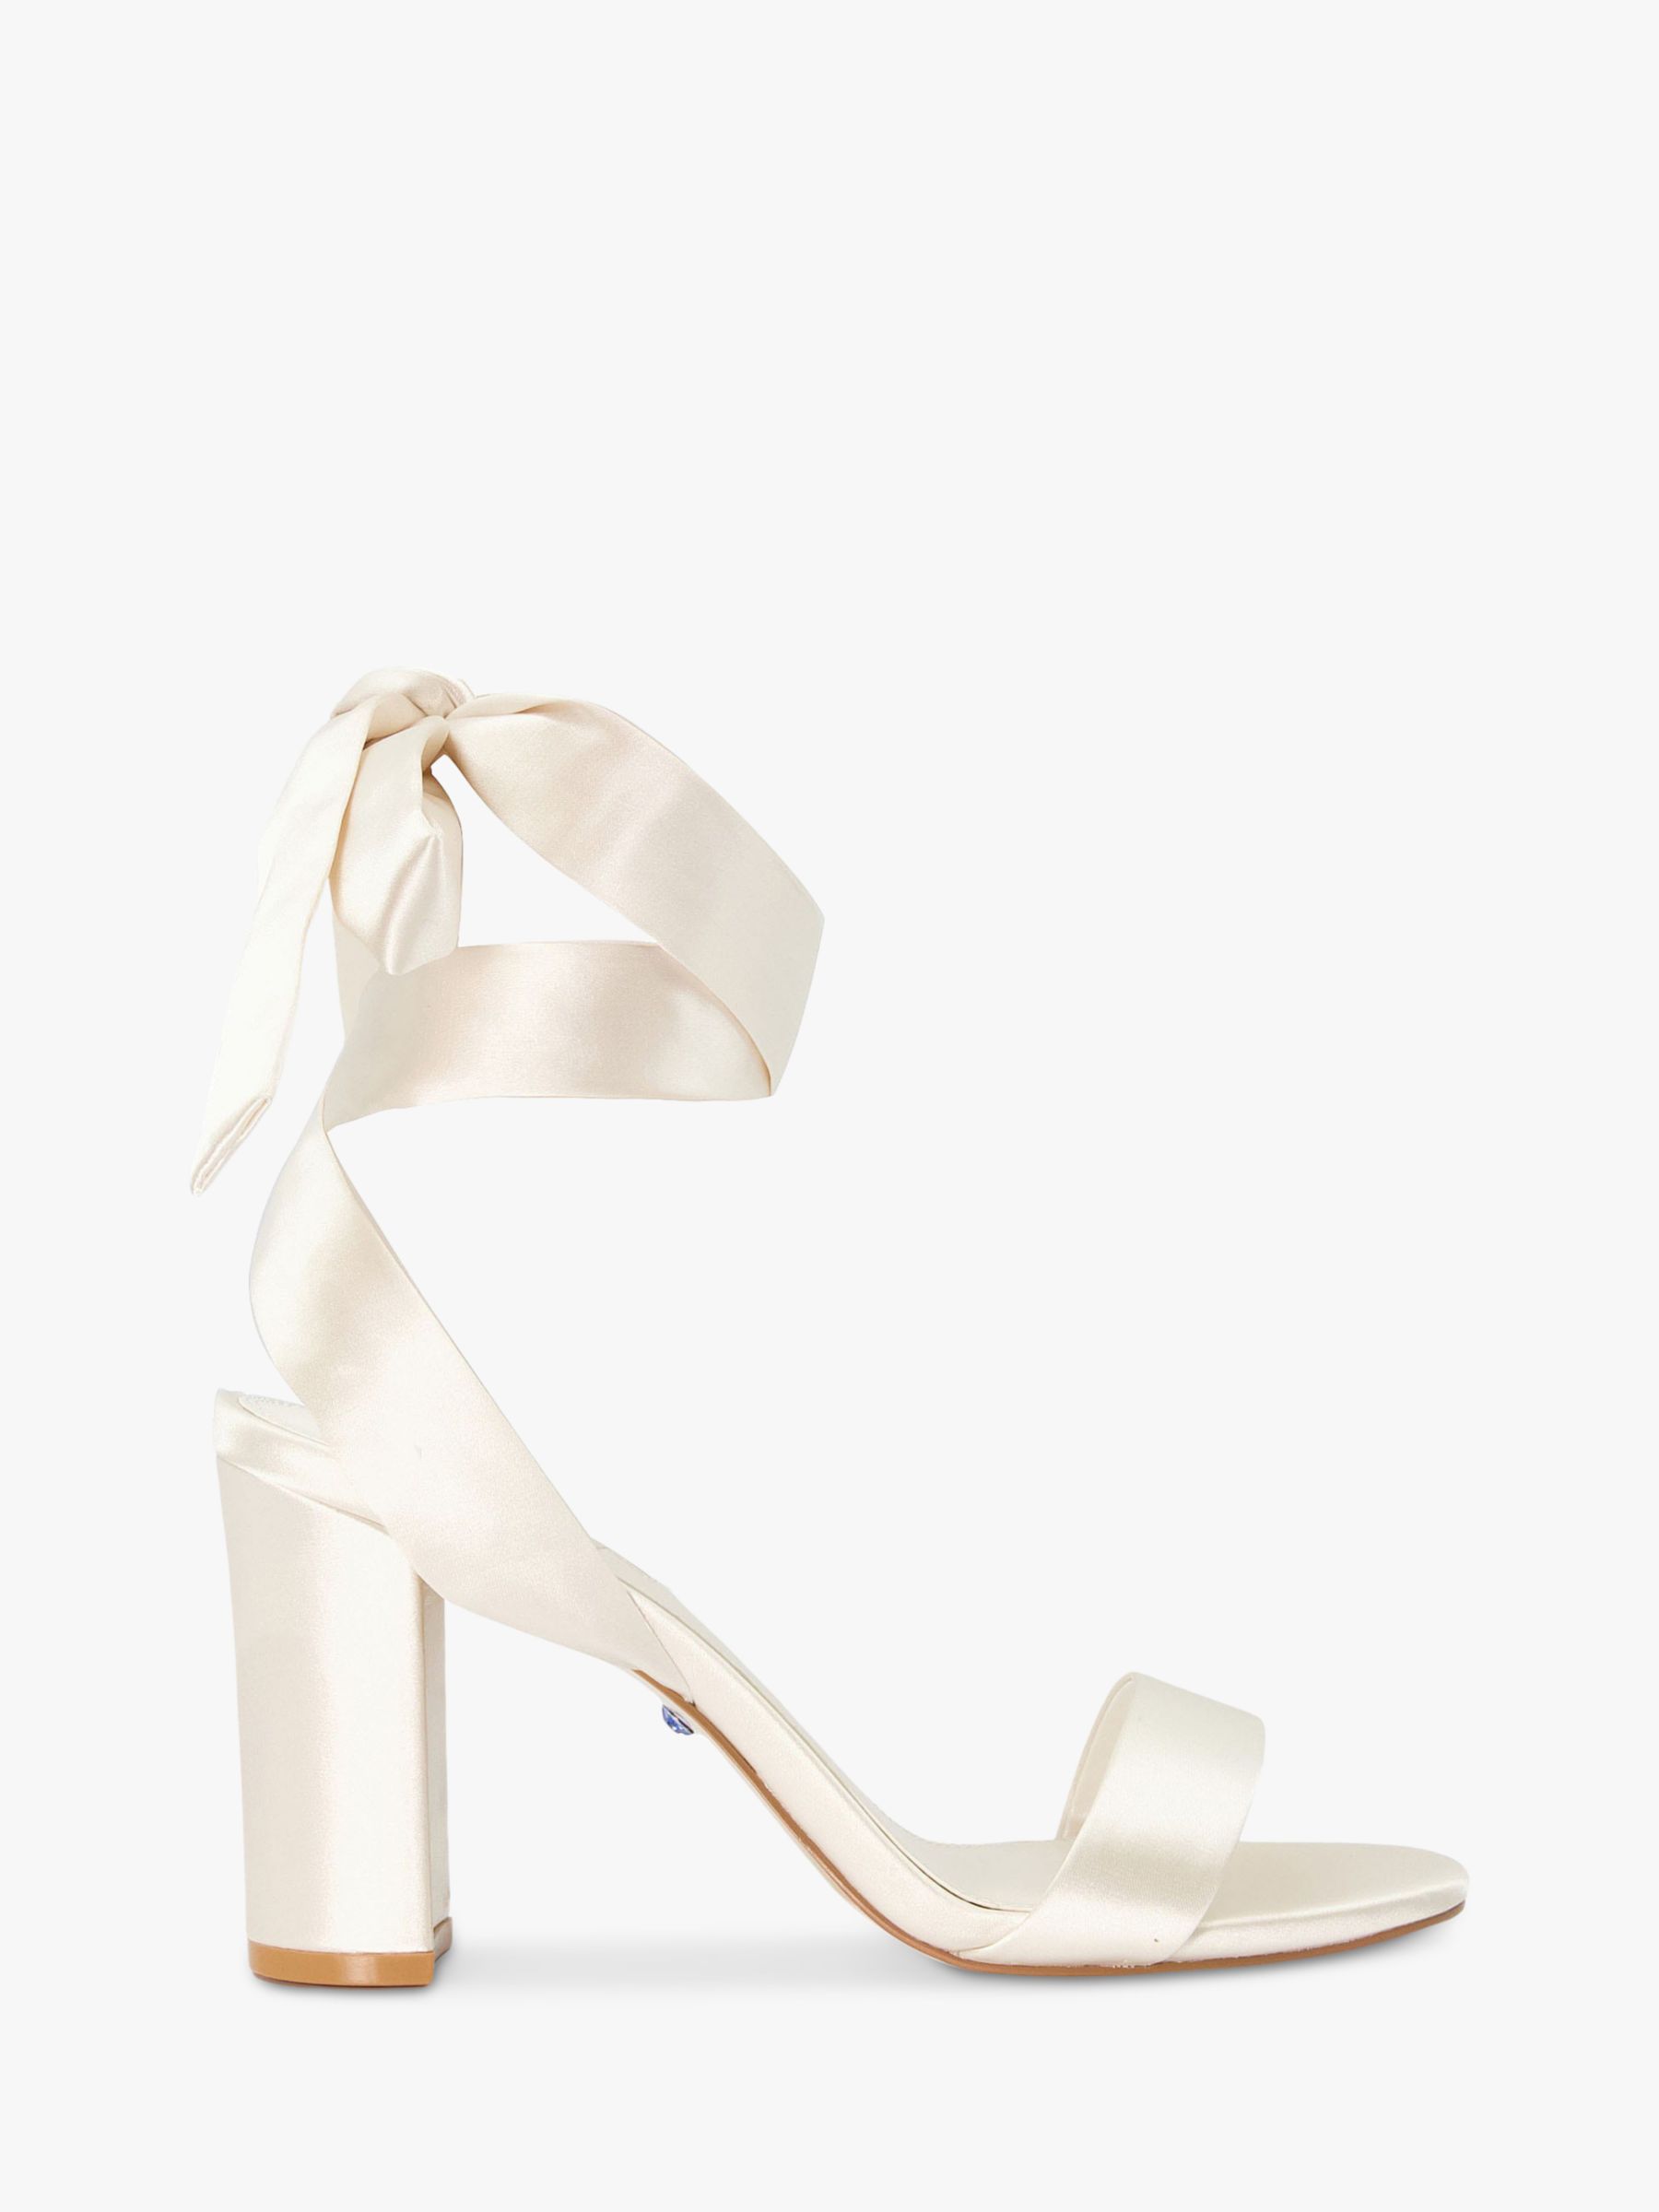 Dune Bridal Collection Marnies Ankle Tie Block Heel Satin Sandals, Ivory